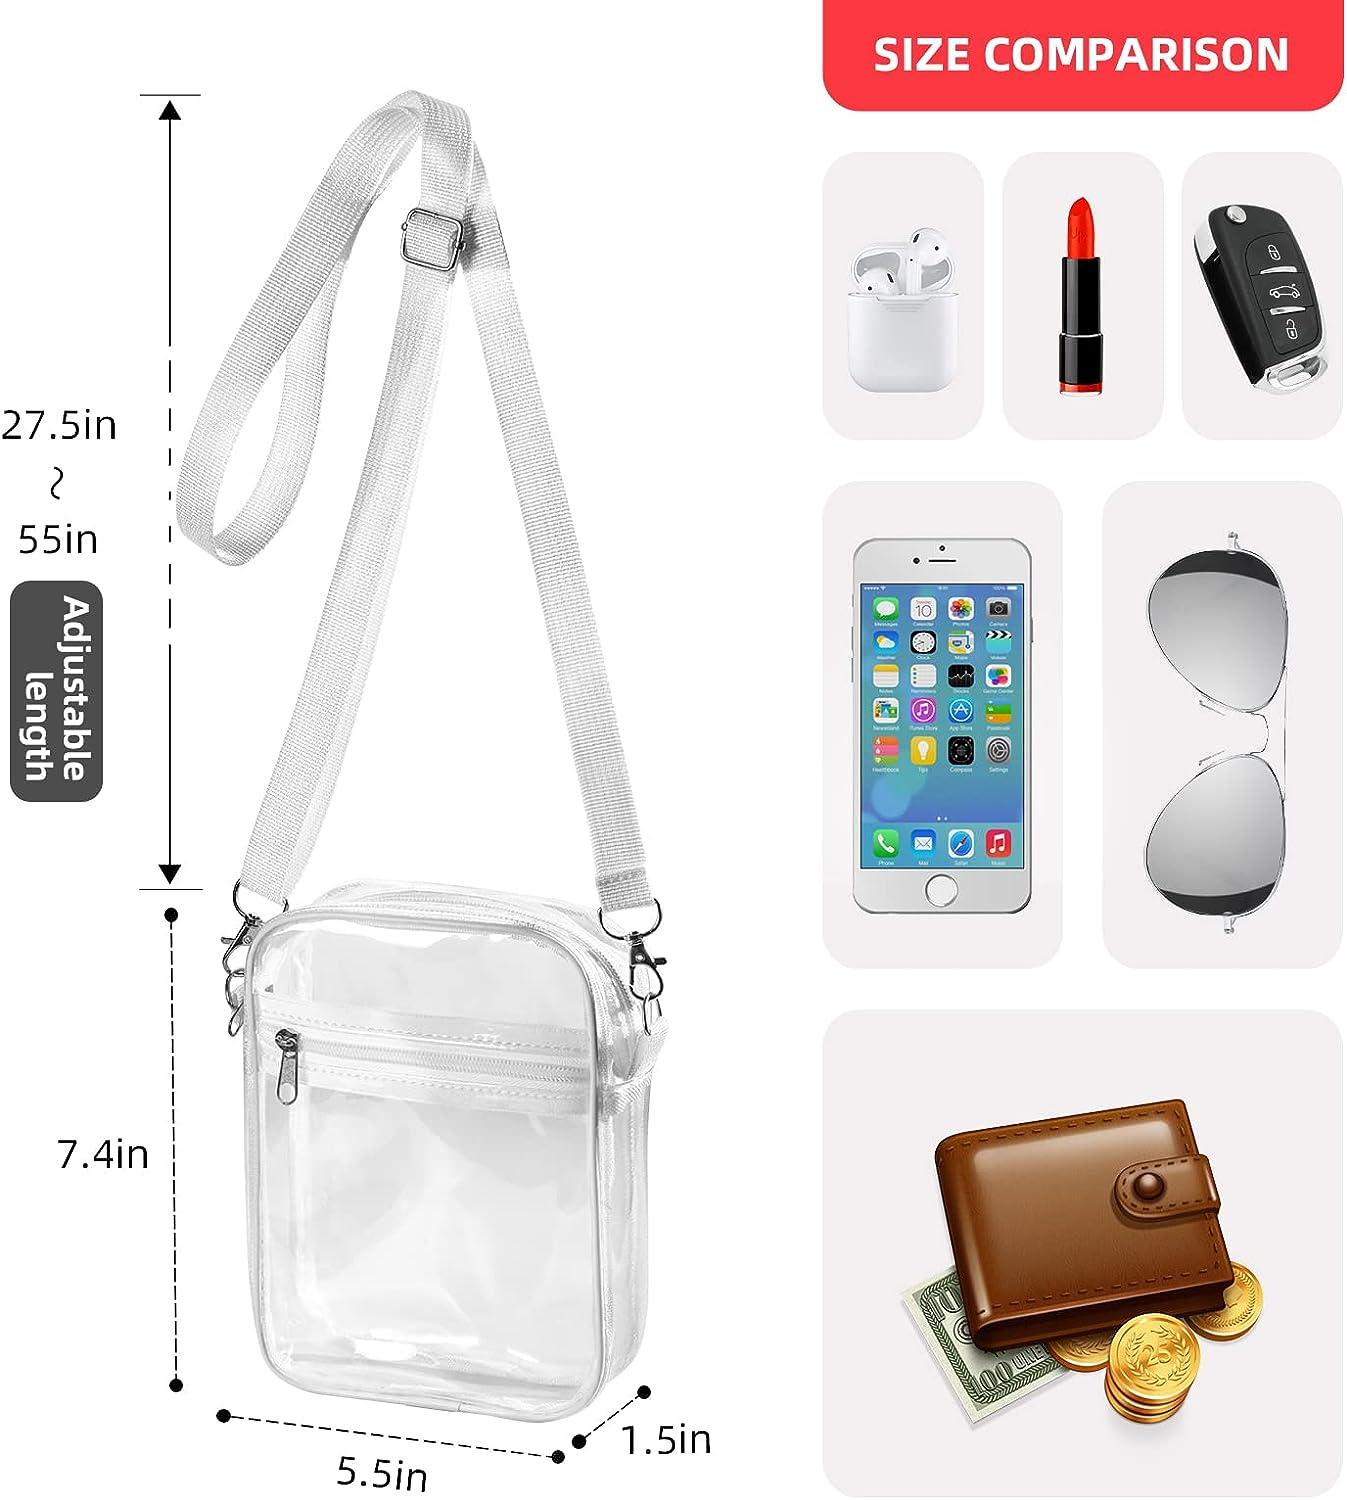 WJCD Clear Bag Stadium Approved PVC Concert Clear Purse Clear Crossbody Purse  Bag clear bags for women,With front pocket White